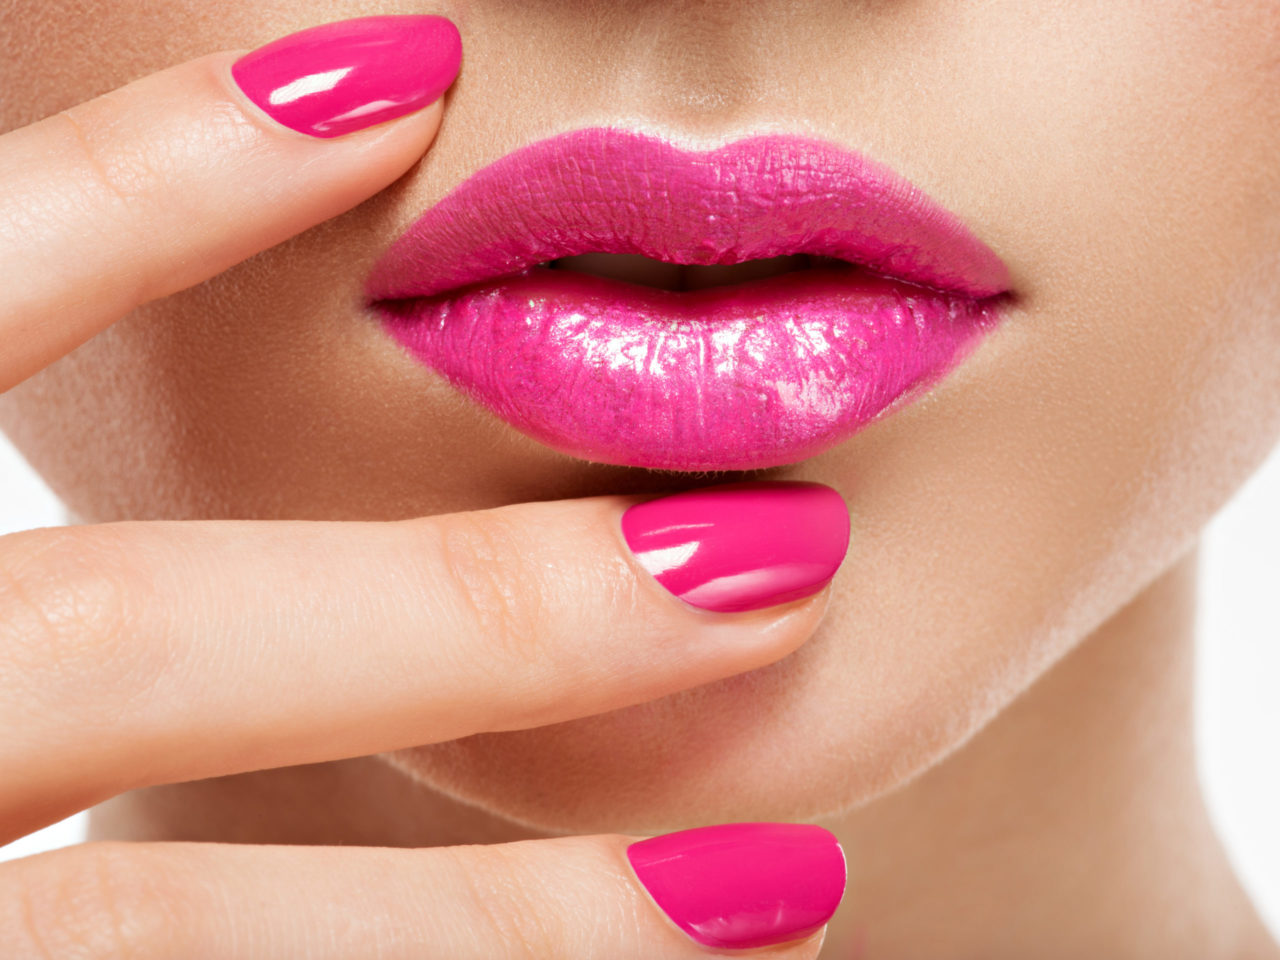 Closeup woman hand with pink nails near lips.